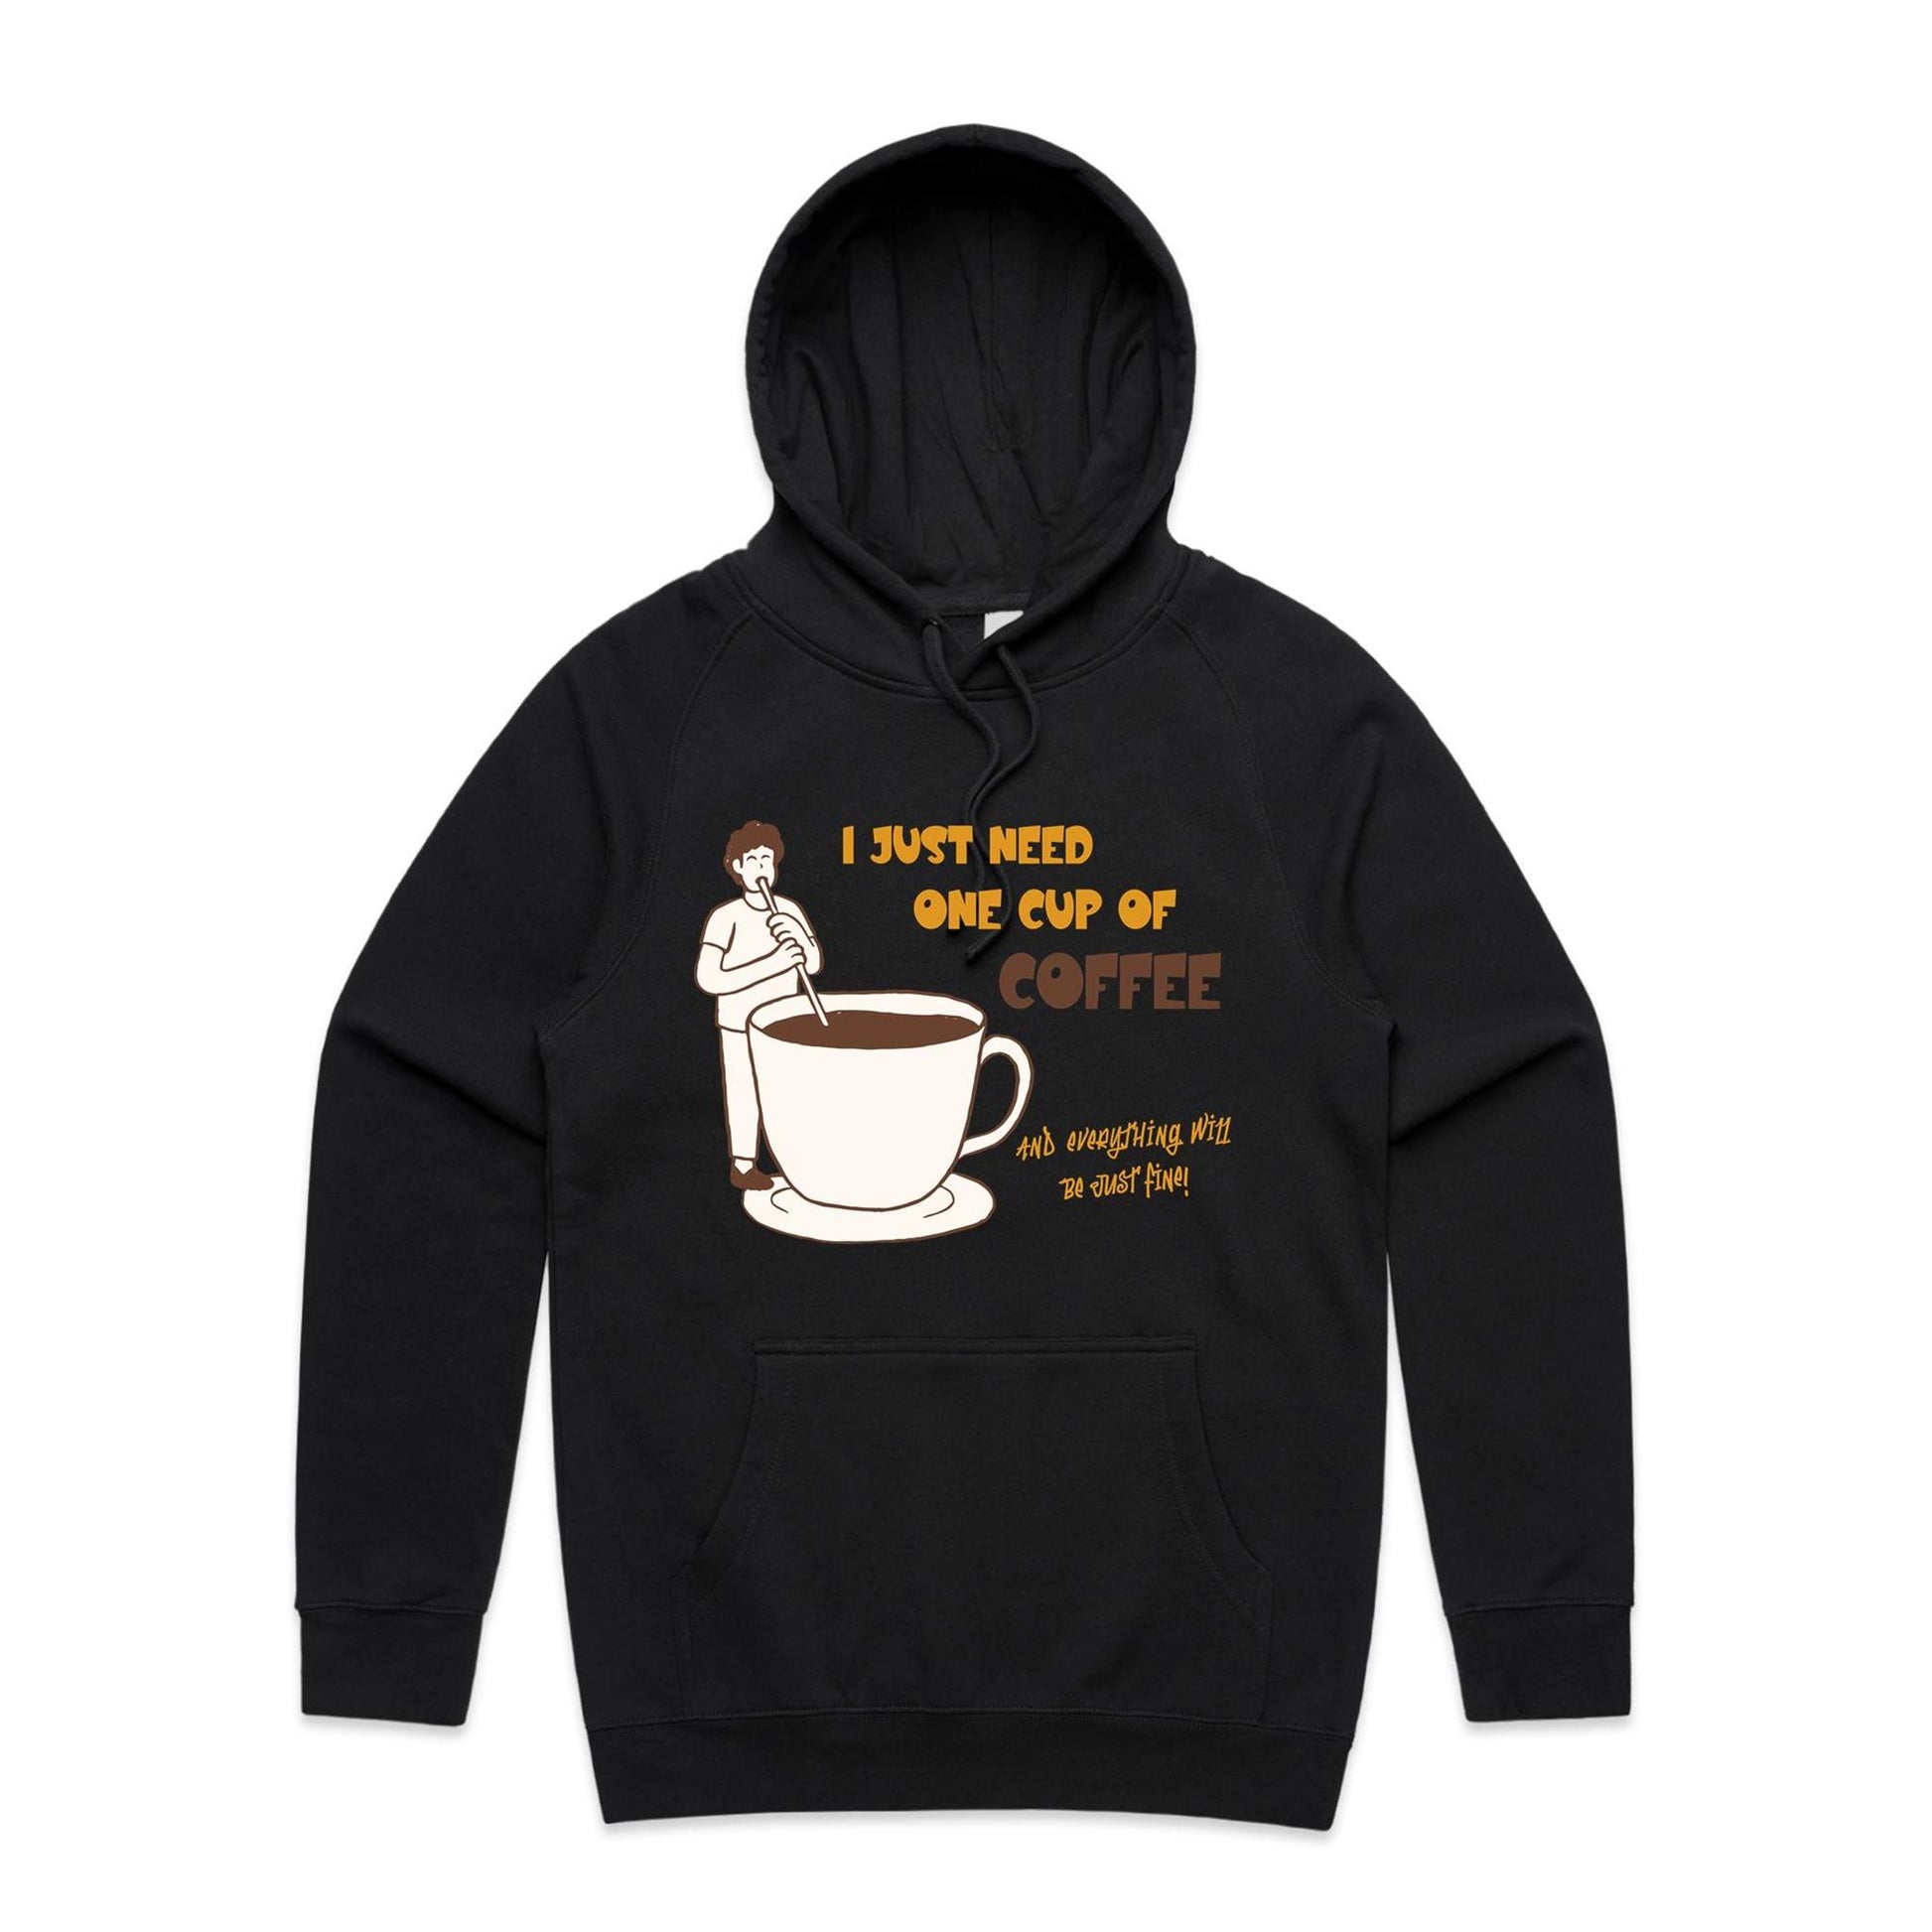 I Just Need One Cup Of Coffee And Everything Will Be Just Fine - Supply Hood Black Mens Supply Hoodie Coffee